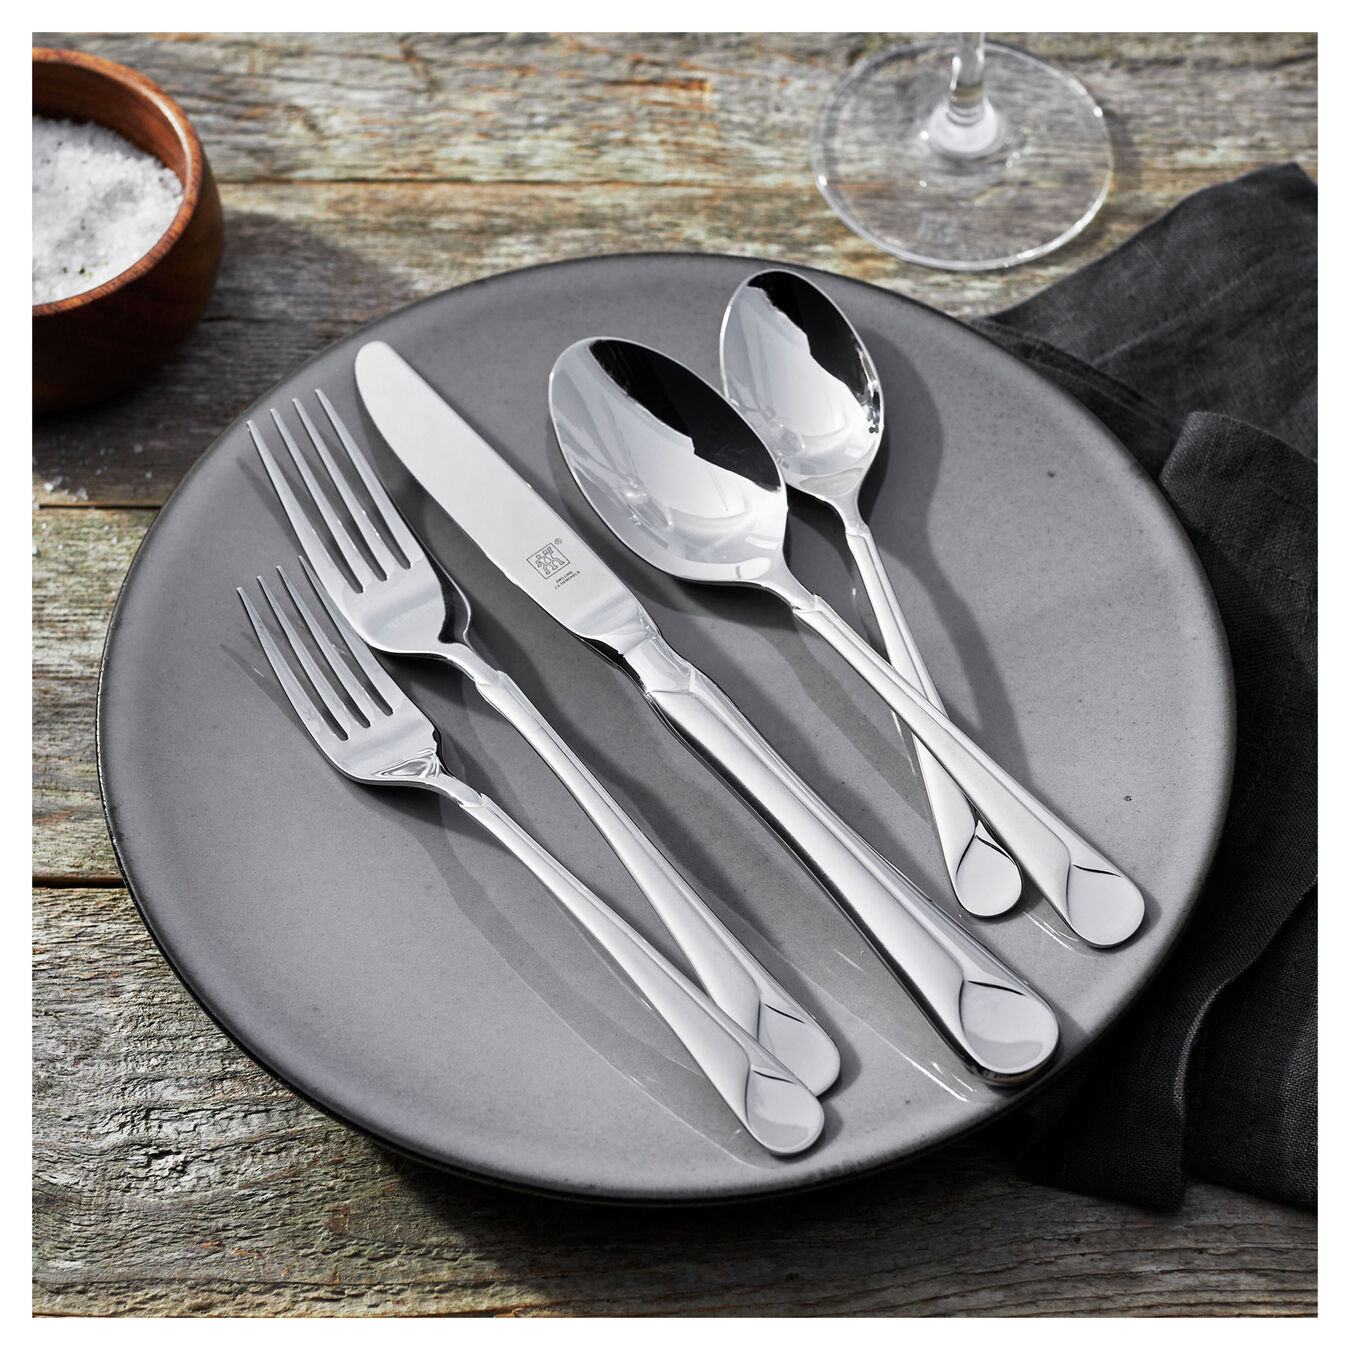 45-pc Flatware Set, 18/10 Stainless Steel ,,large 5